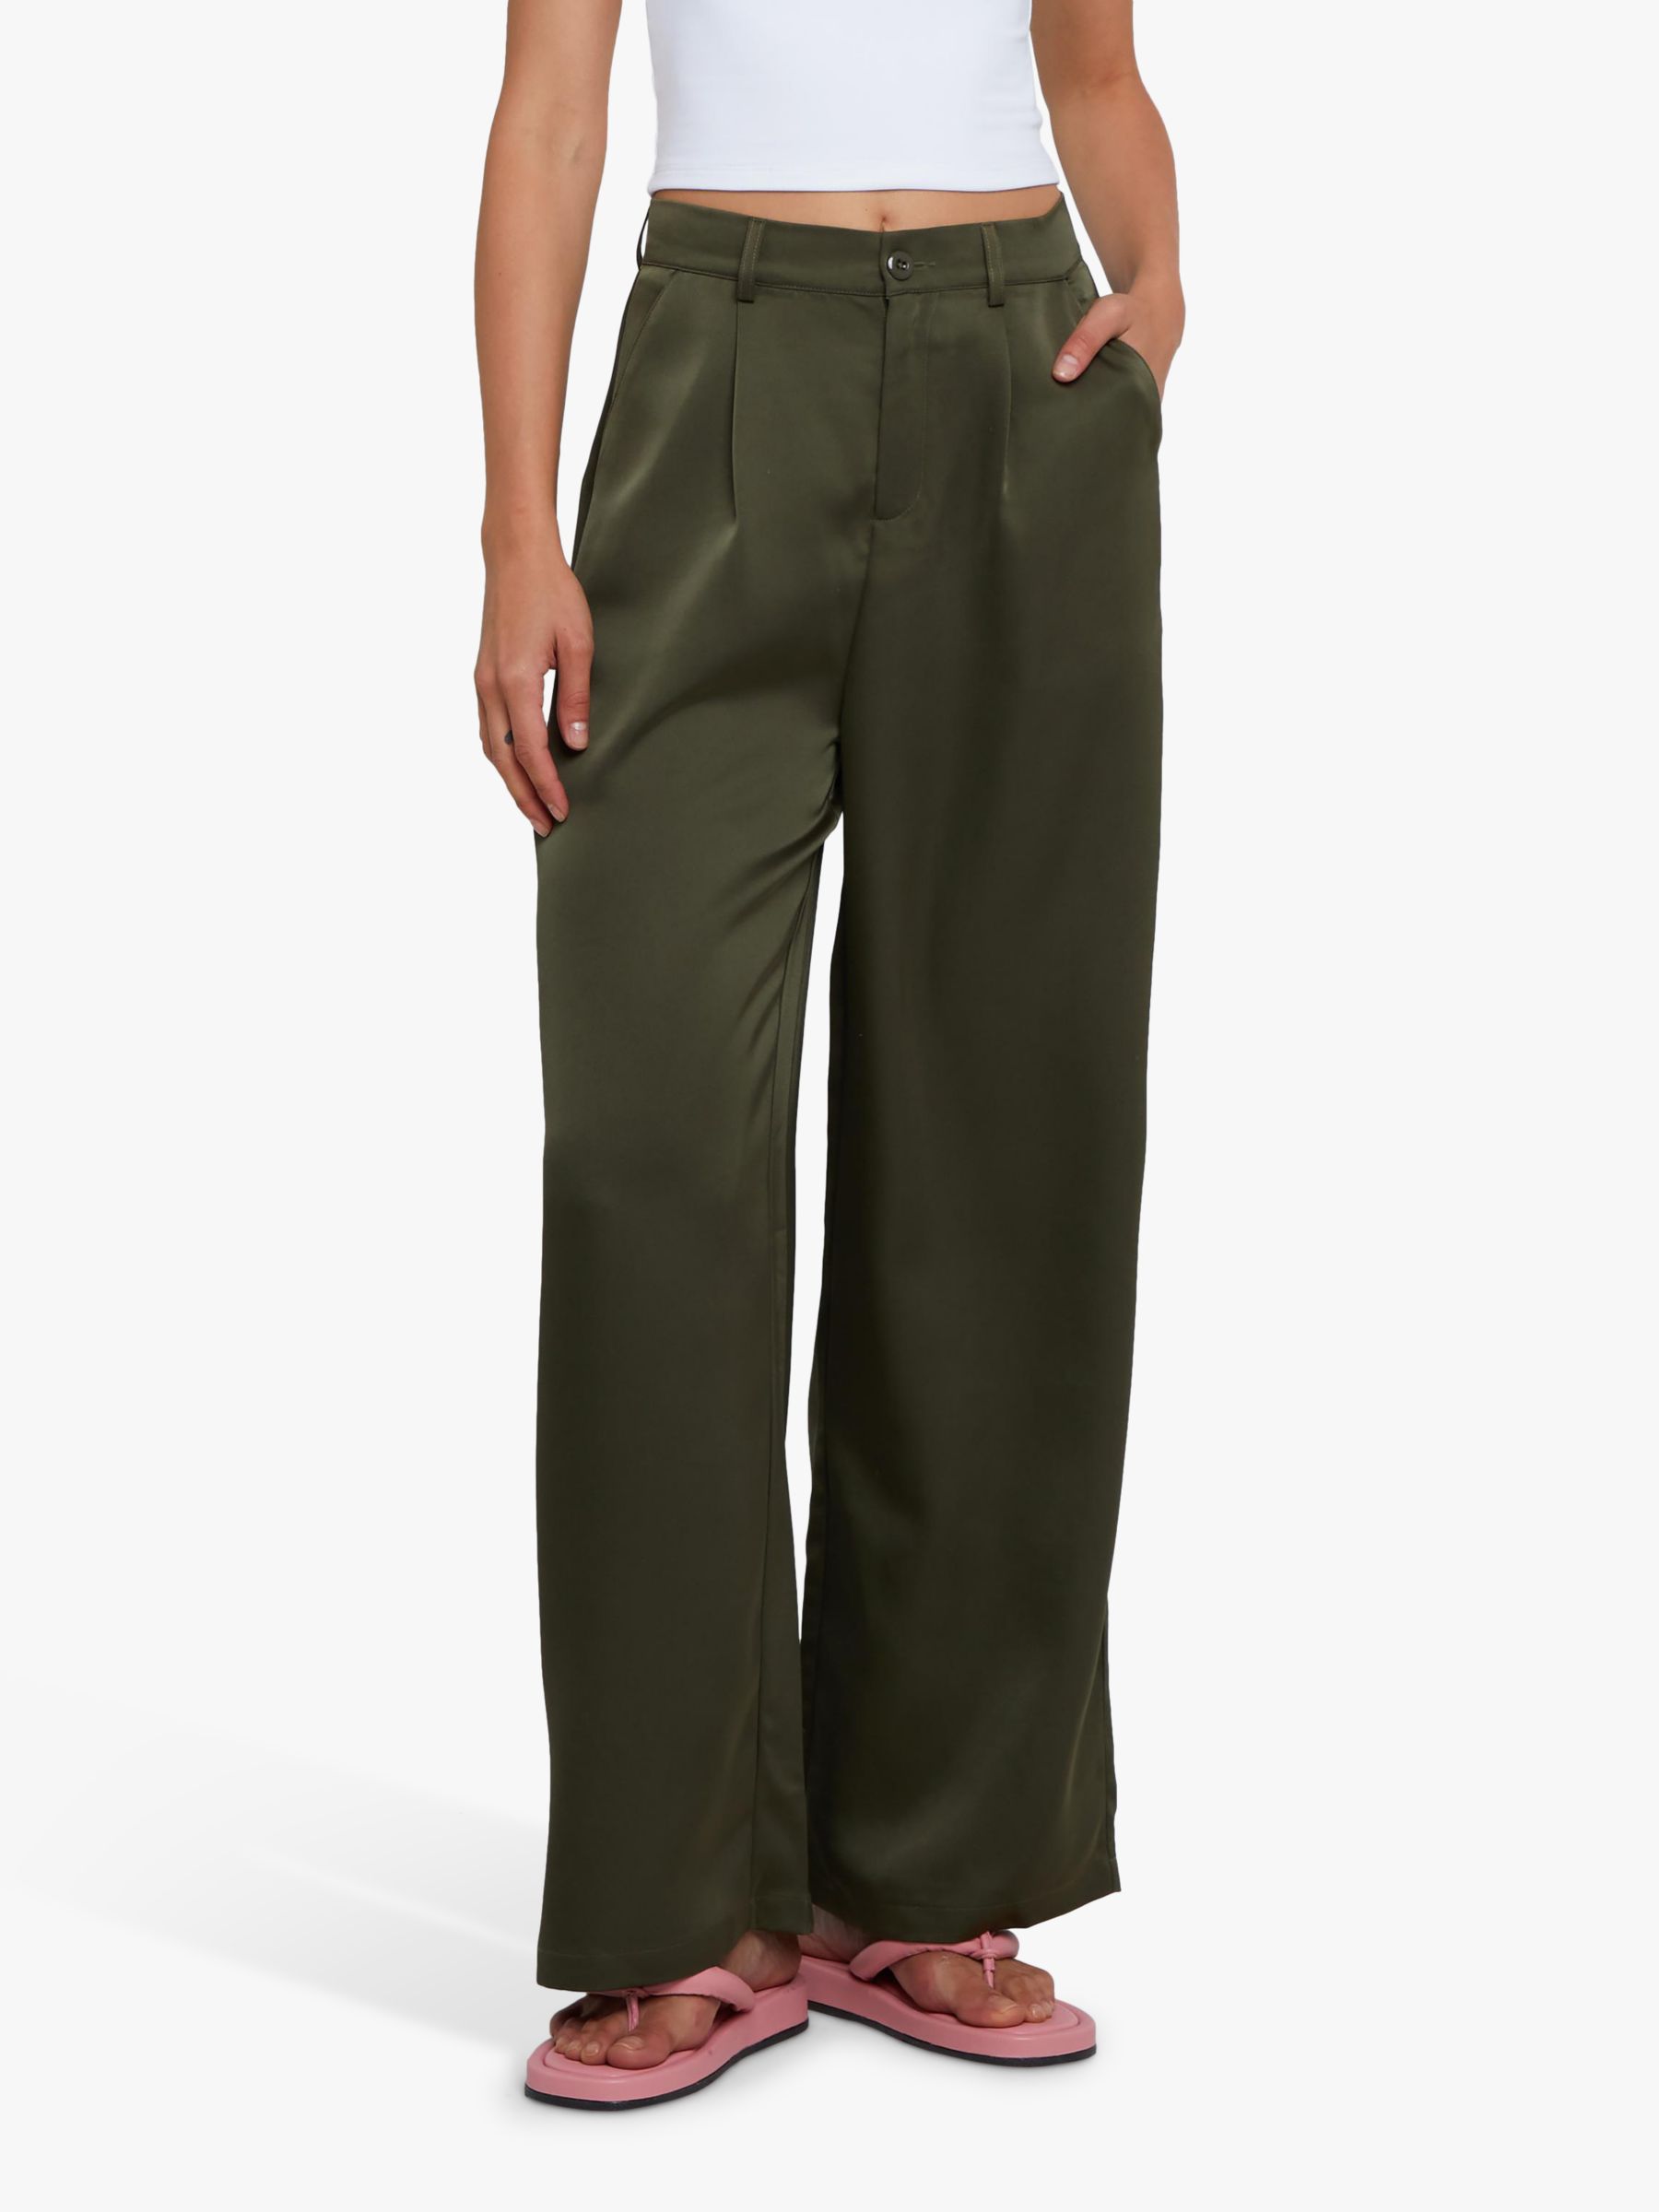 kourt Dixion Relaxed Trousers, Green, S